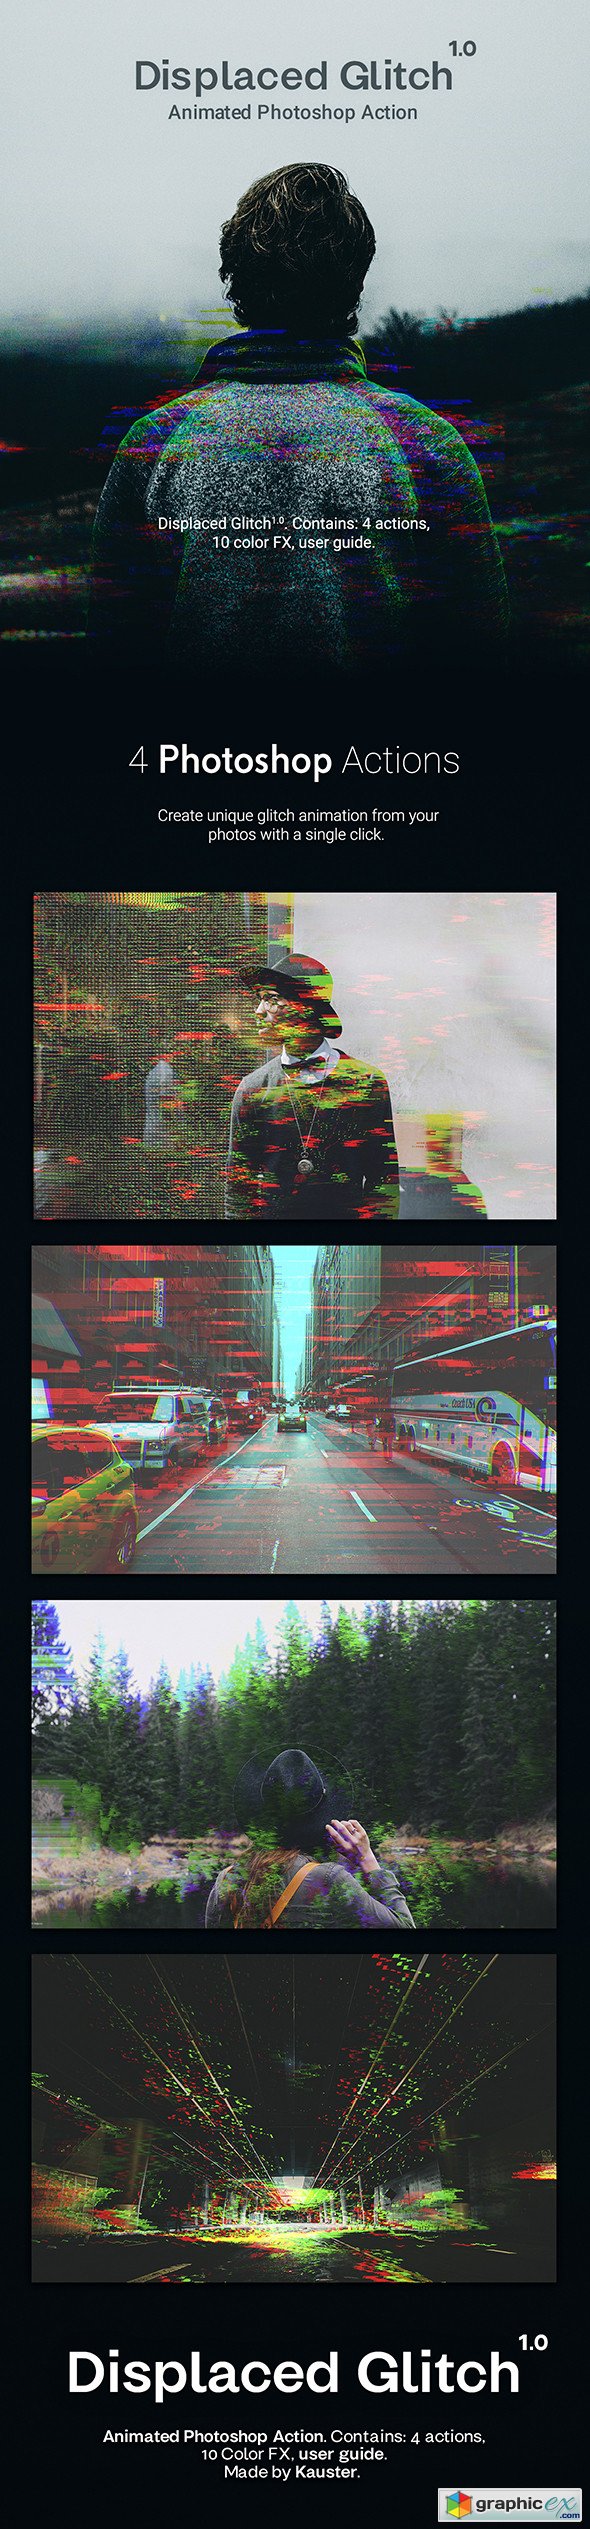 Displaced Glitch - Animated Photoshop Action